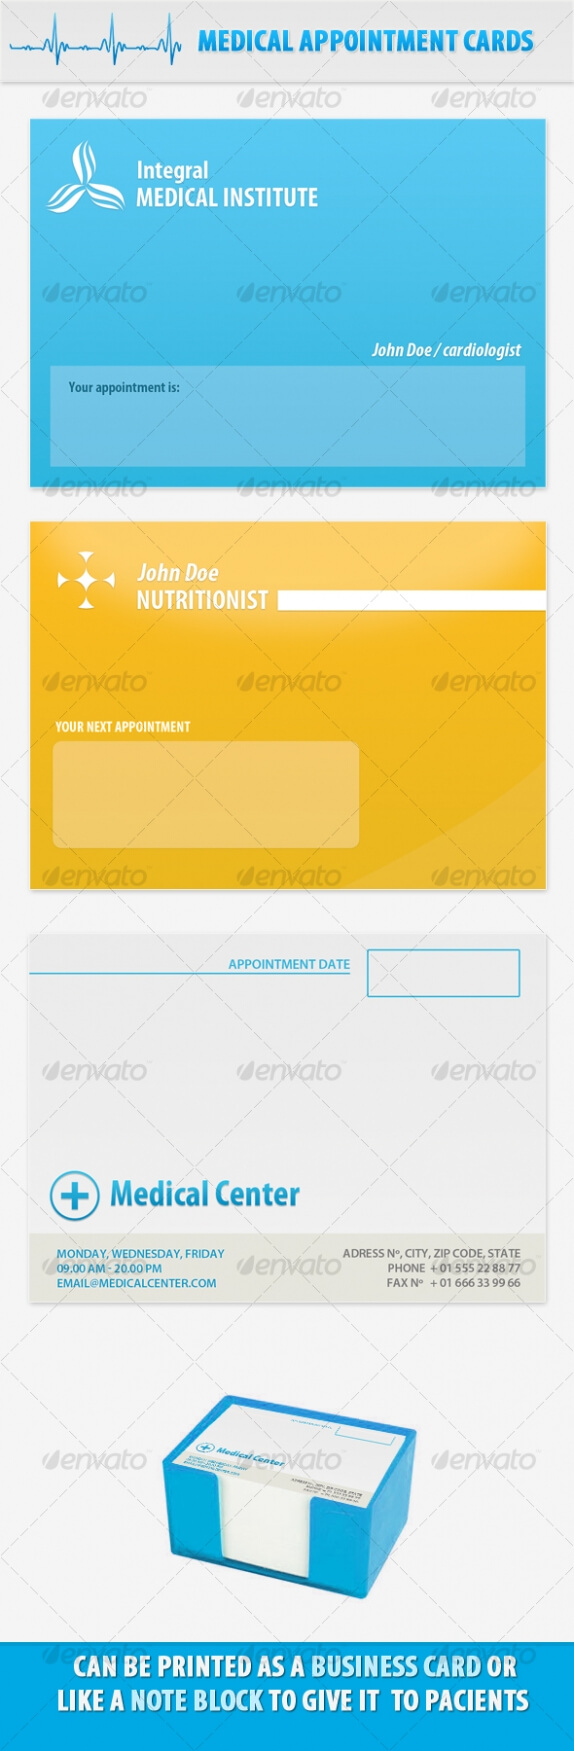 Cardview – Business Card & Visit Card Design Inspiration Within Medical Appointment Card Template Free